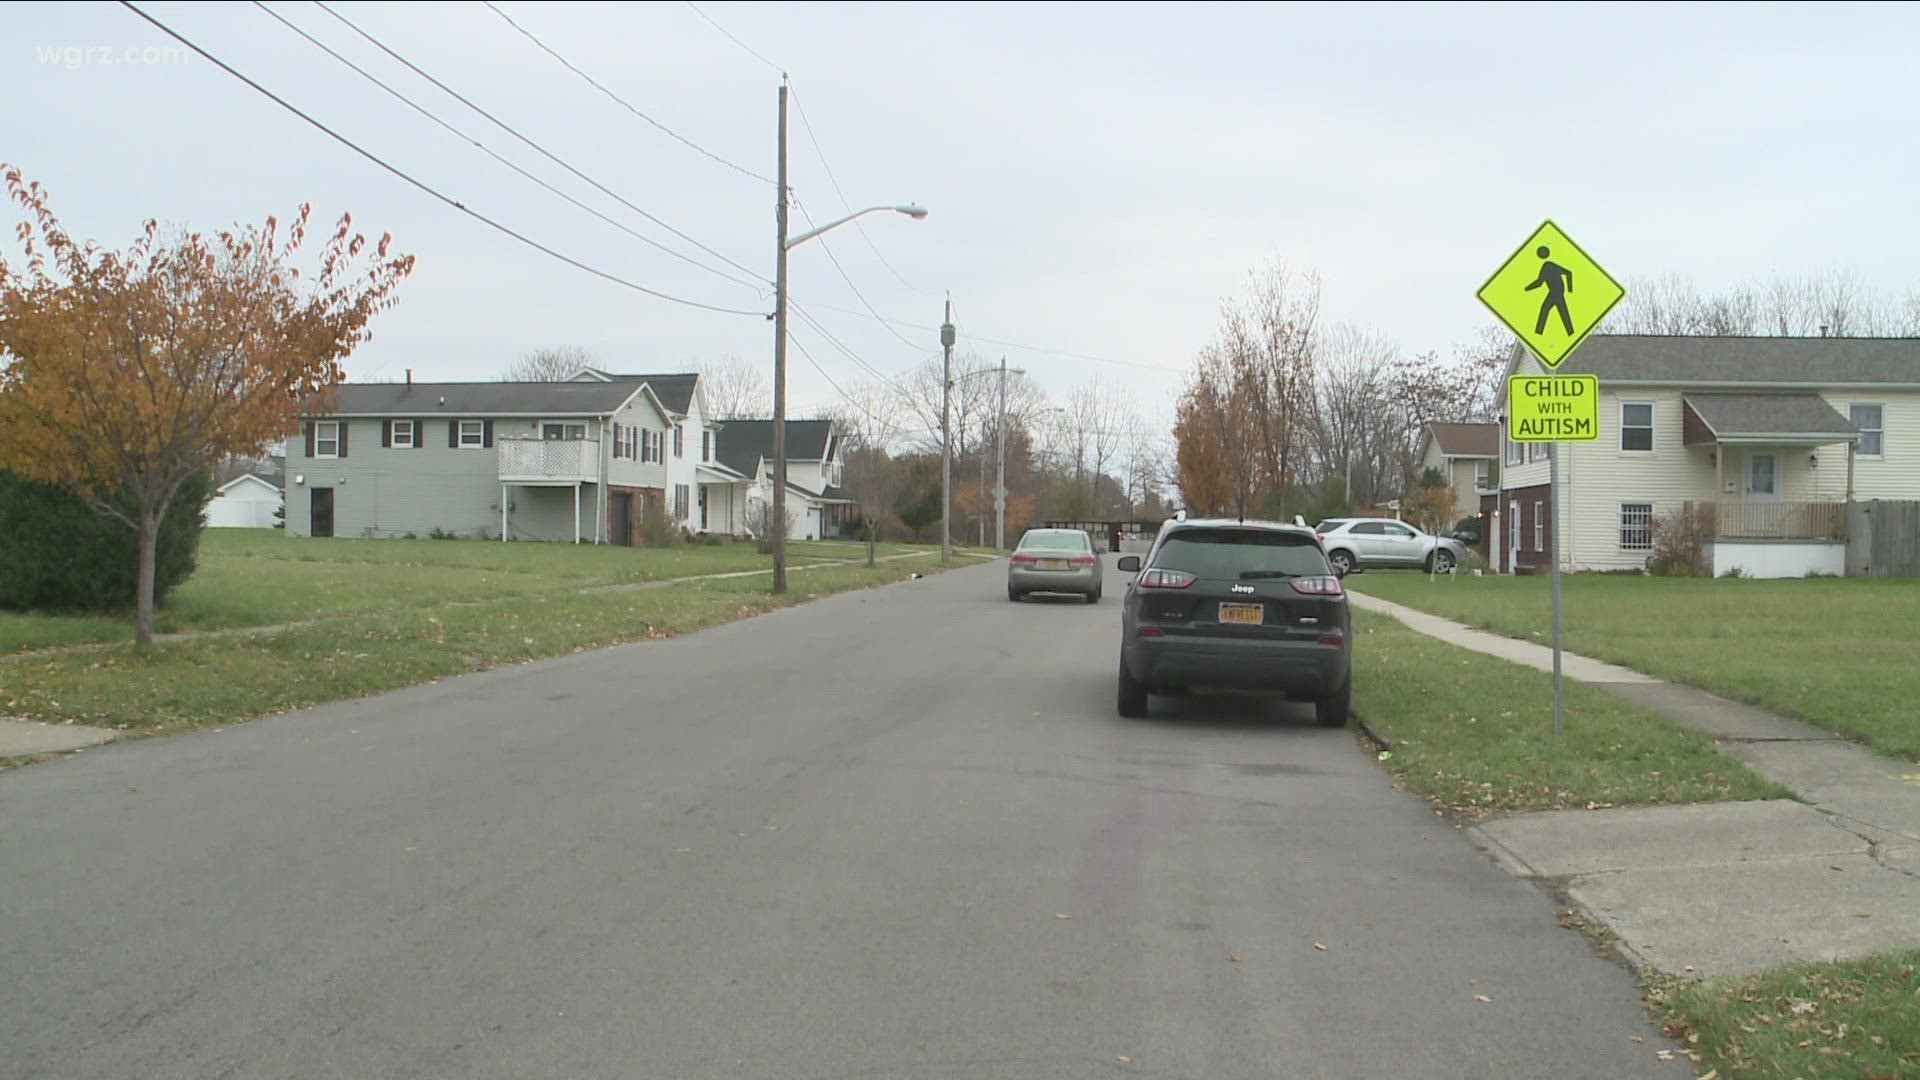 'Child With Autism' signs in Buffalo neighborhoods